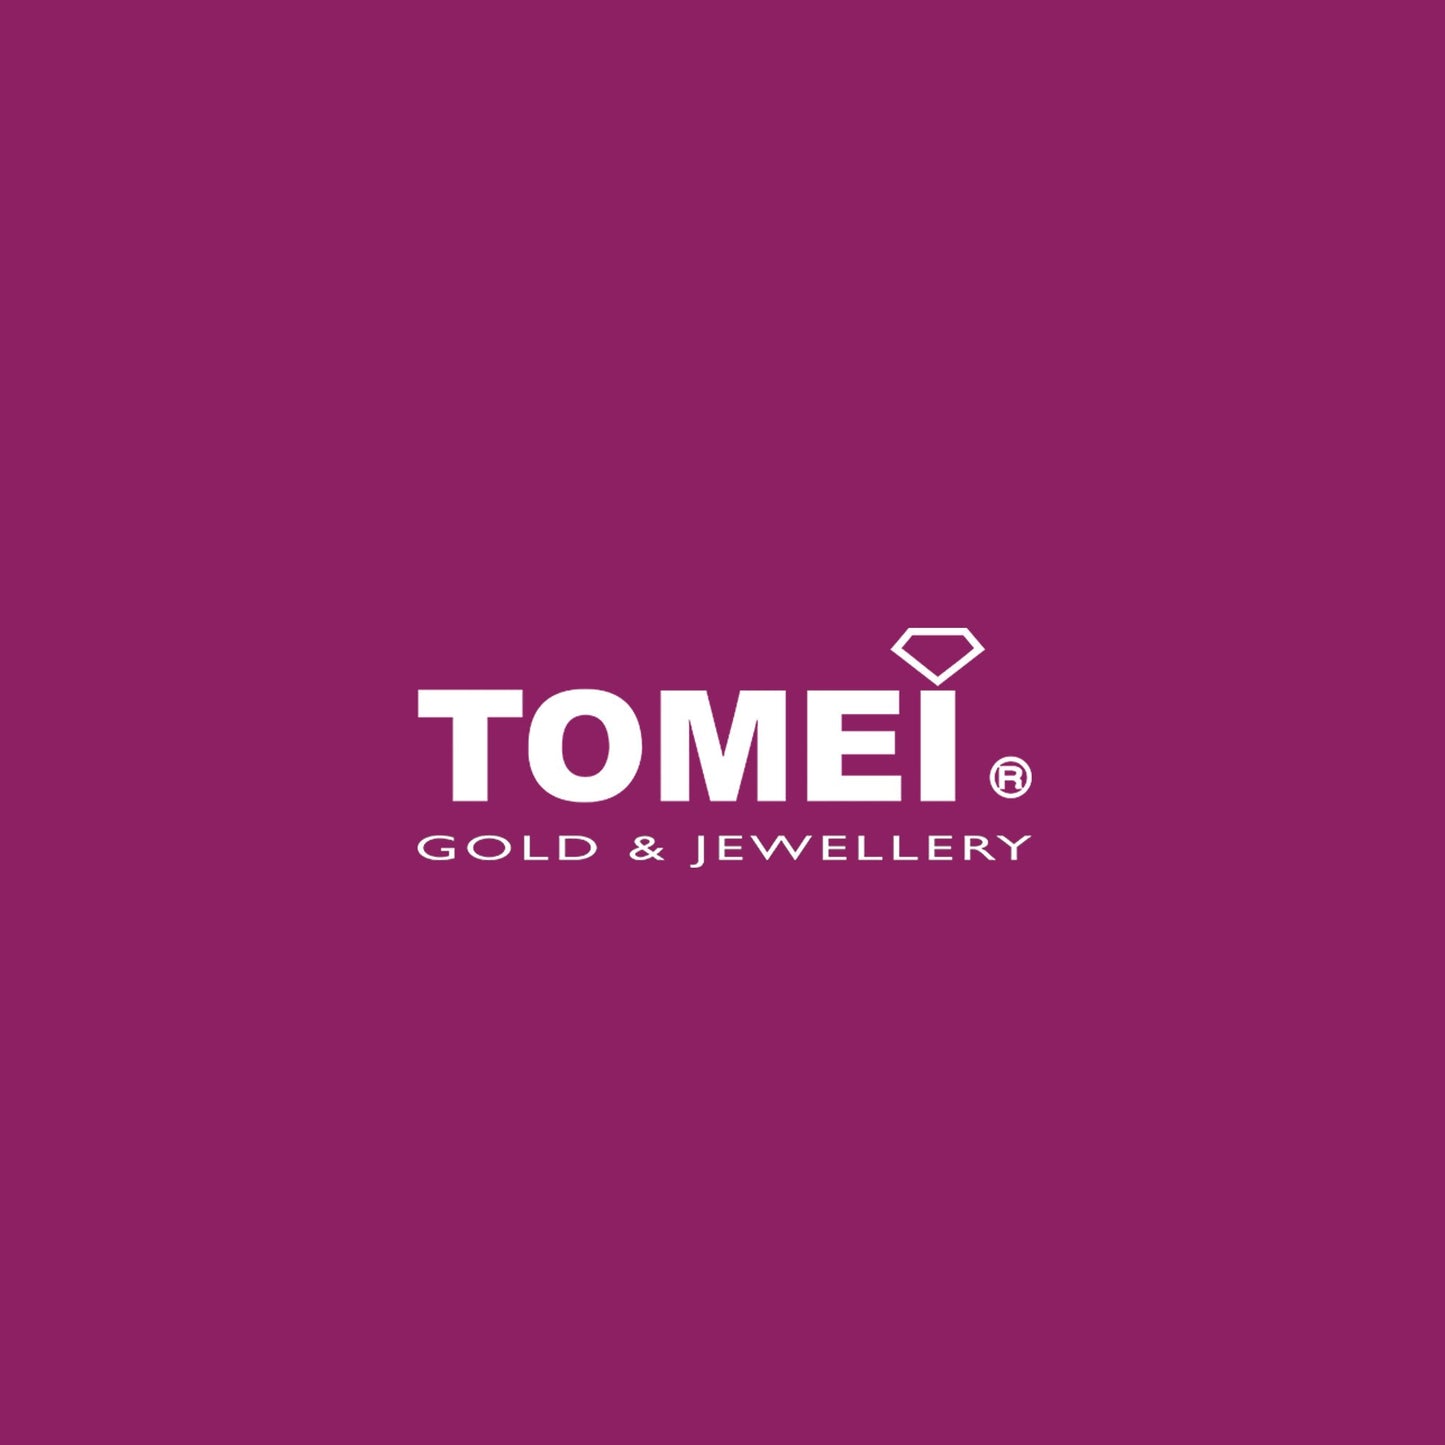 TOMEI Prosperity Frog Ring, Yellow Gold 916